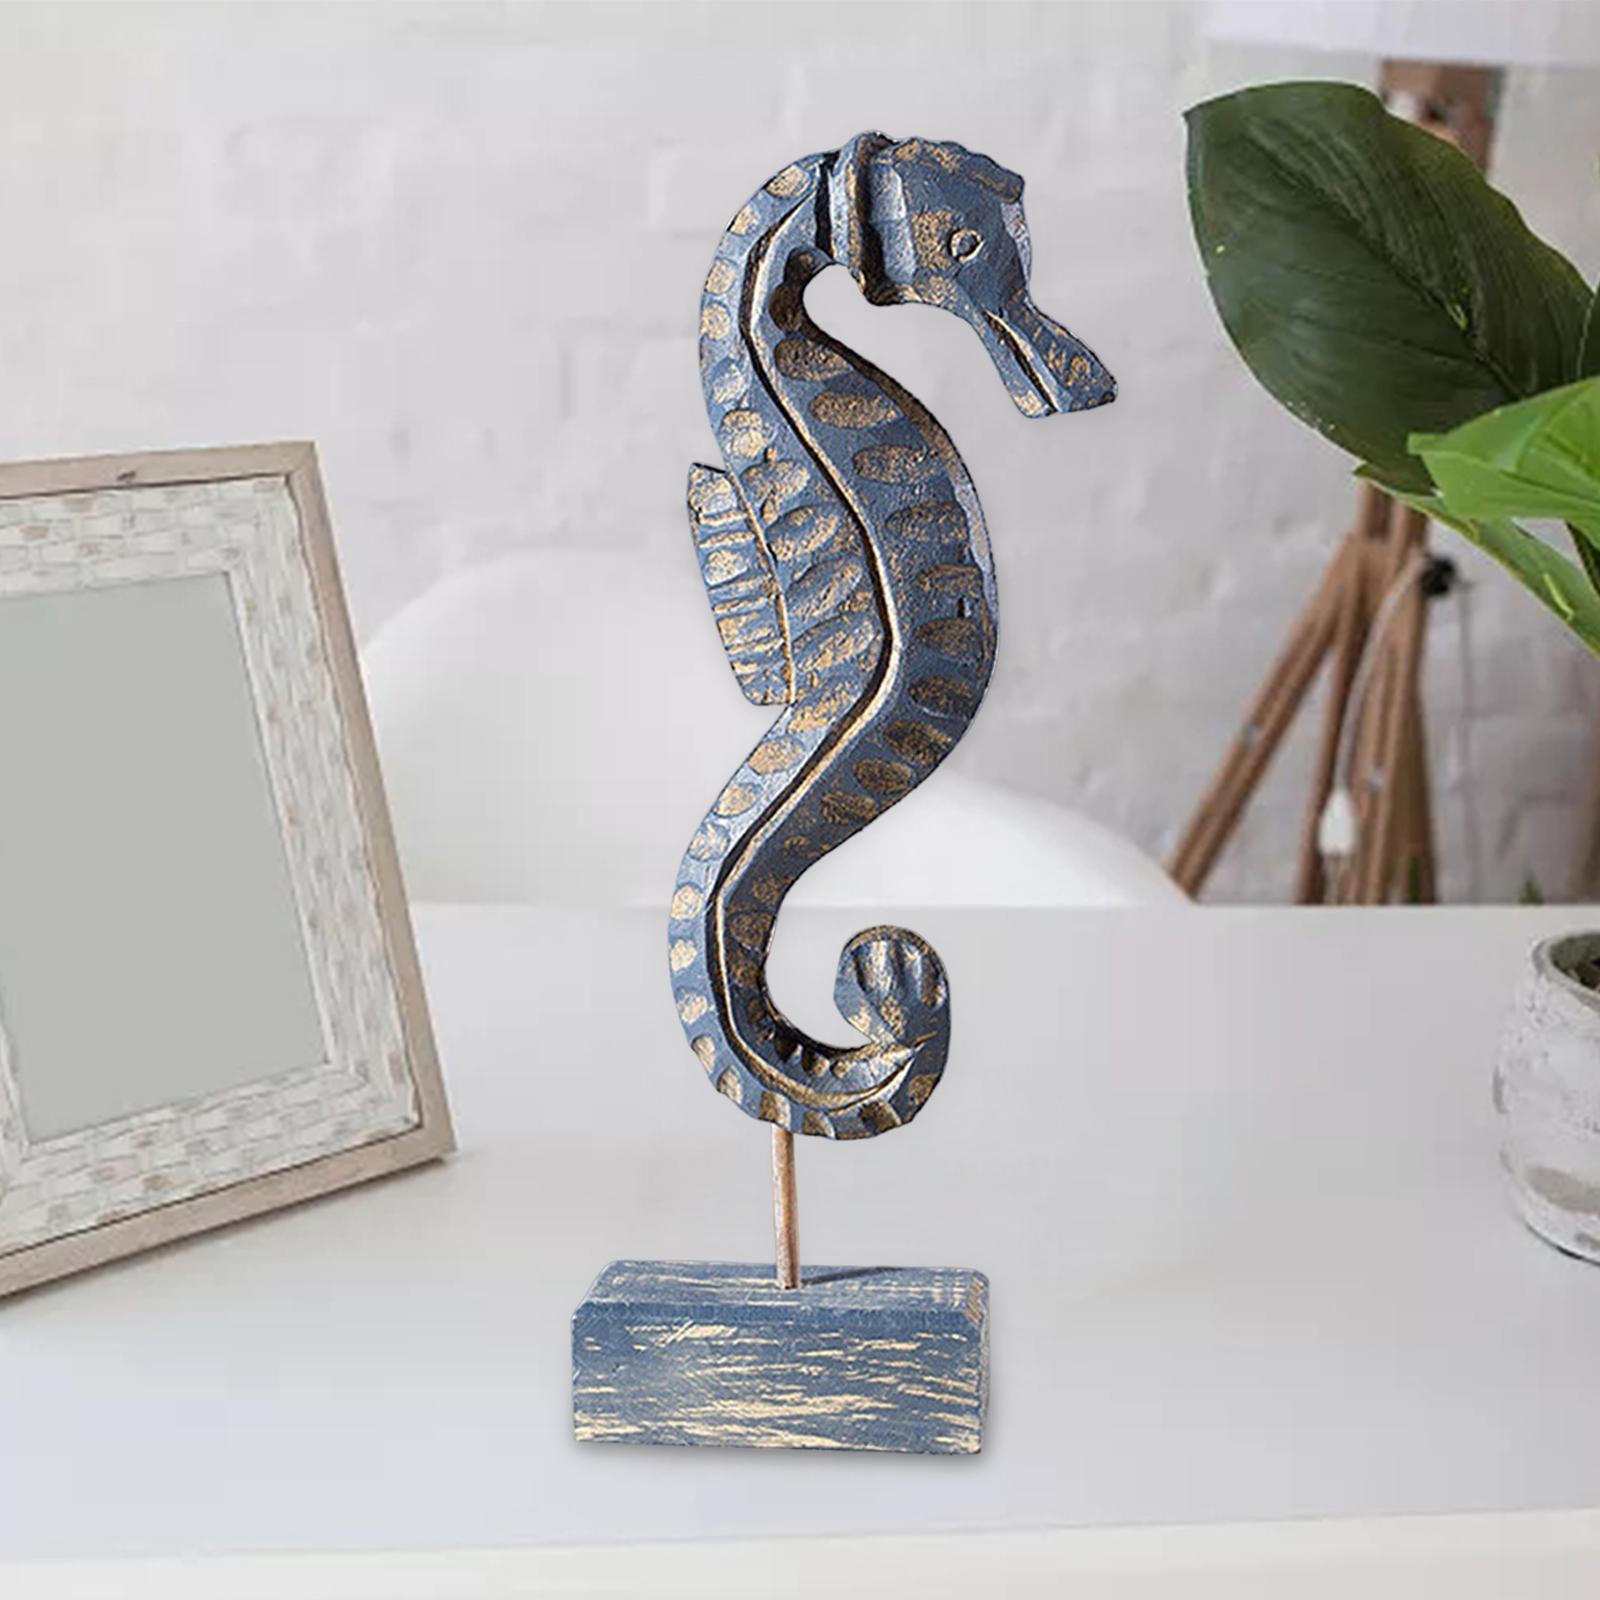 Wood Table Sculpture Statue Nautical Style Figurine for Indoor Restaurant Seahorse 11x33.5cm